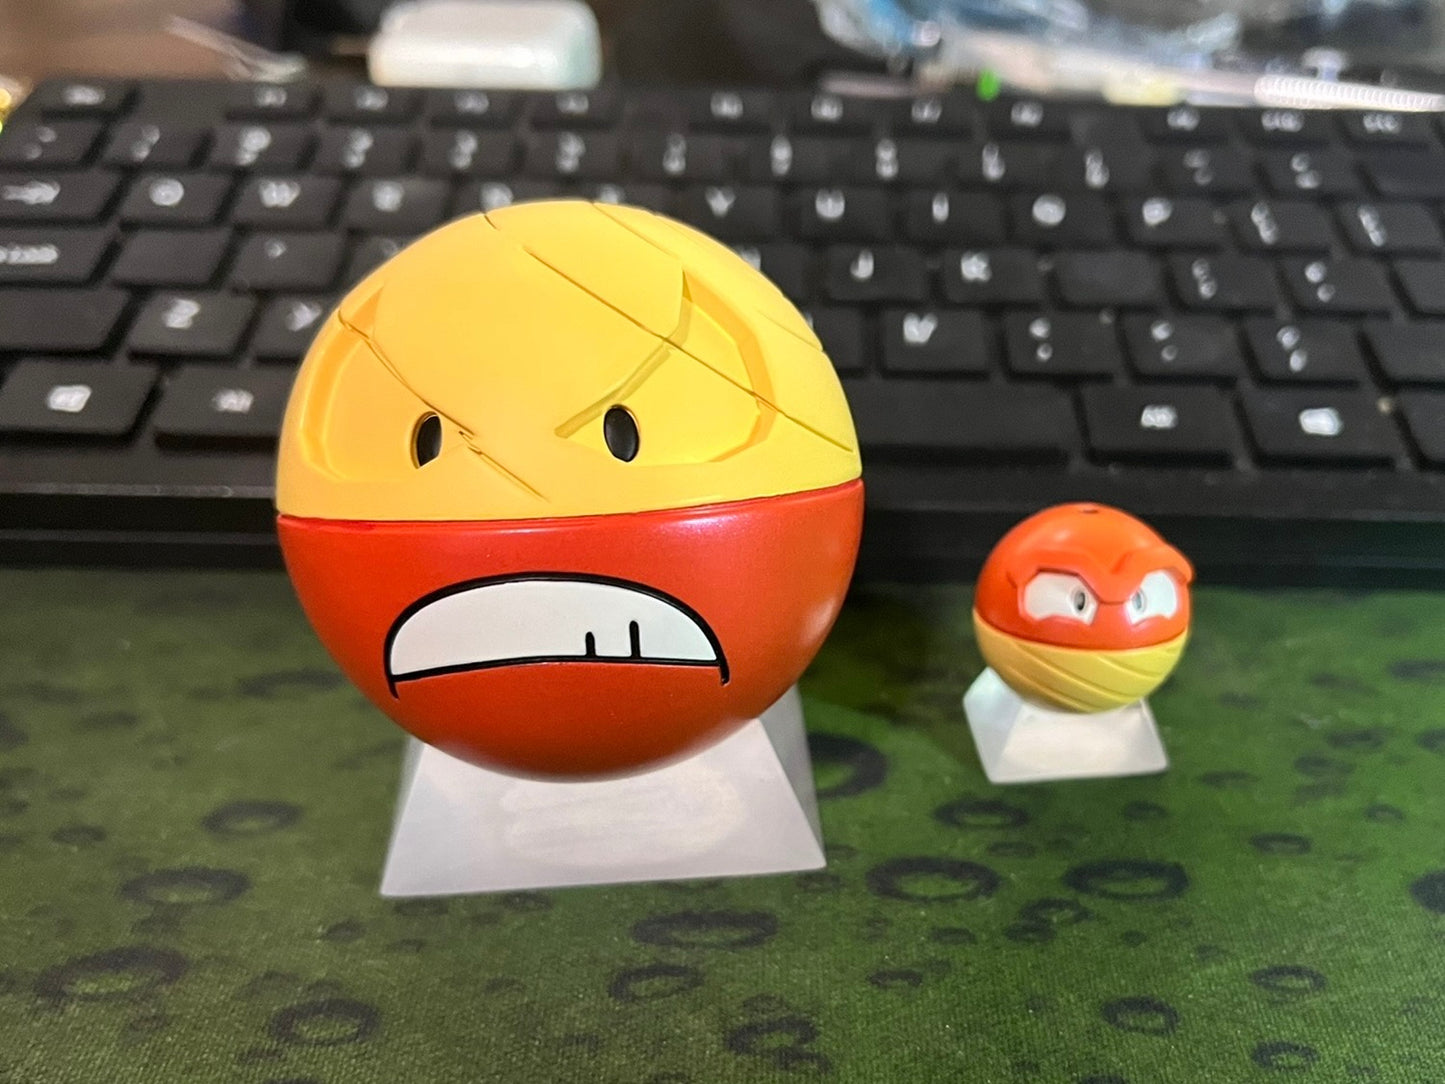 [IN STOCK] 1/20 Scale World Figure [QS] - Hisui Voltorb & Electrode